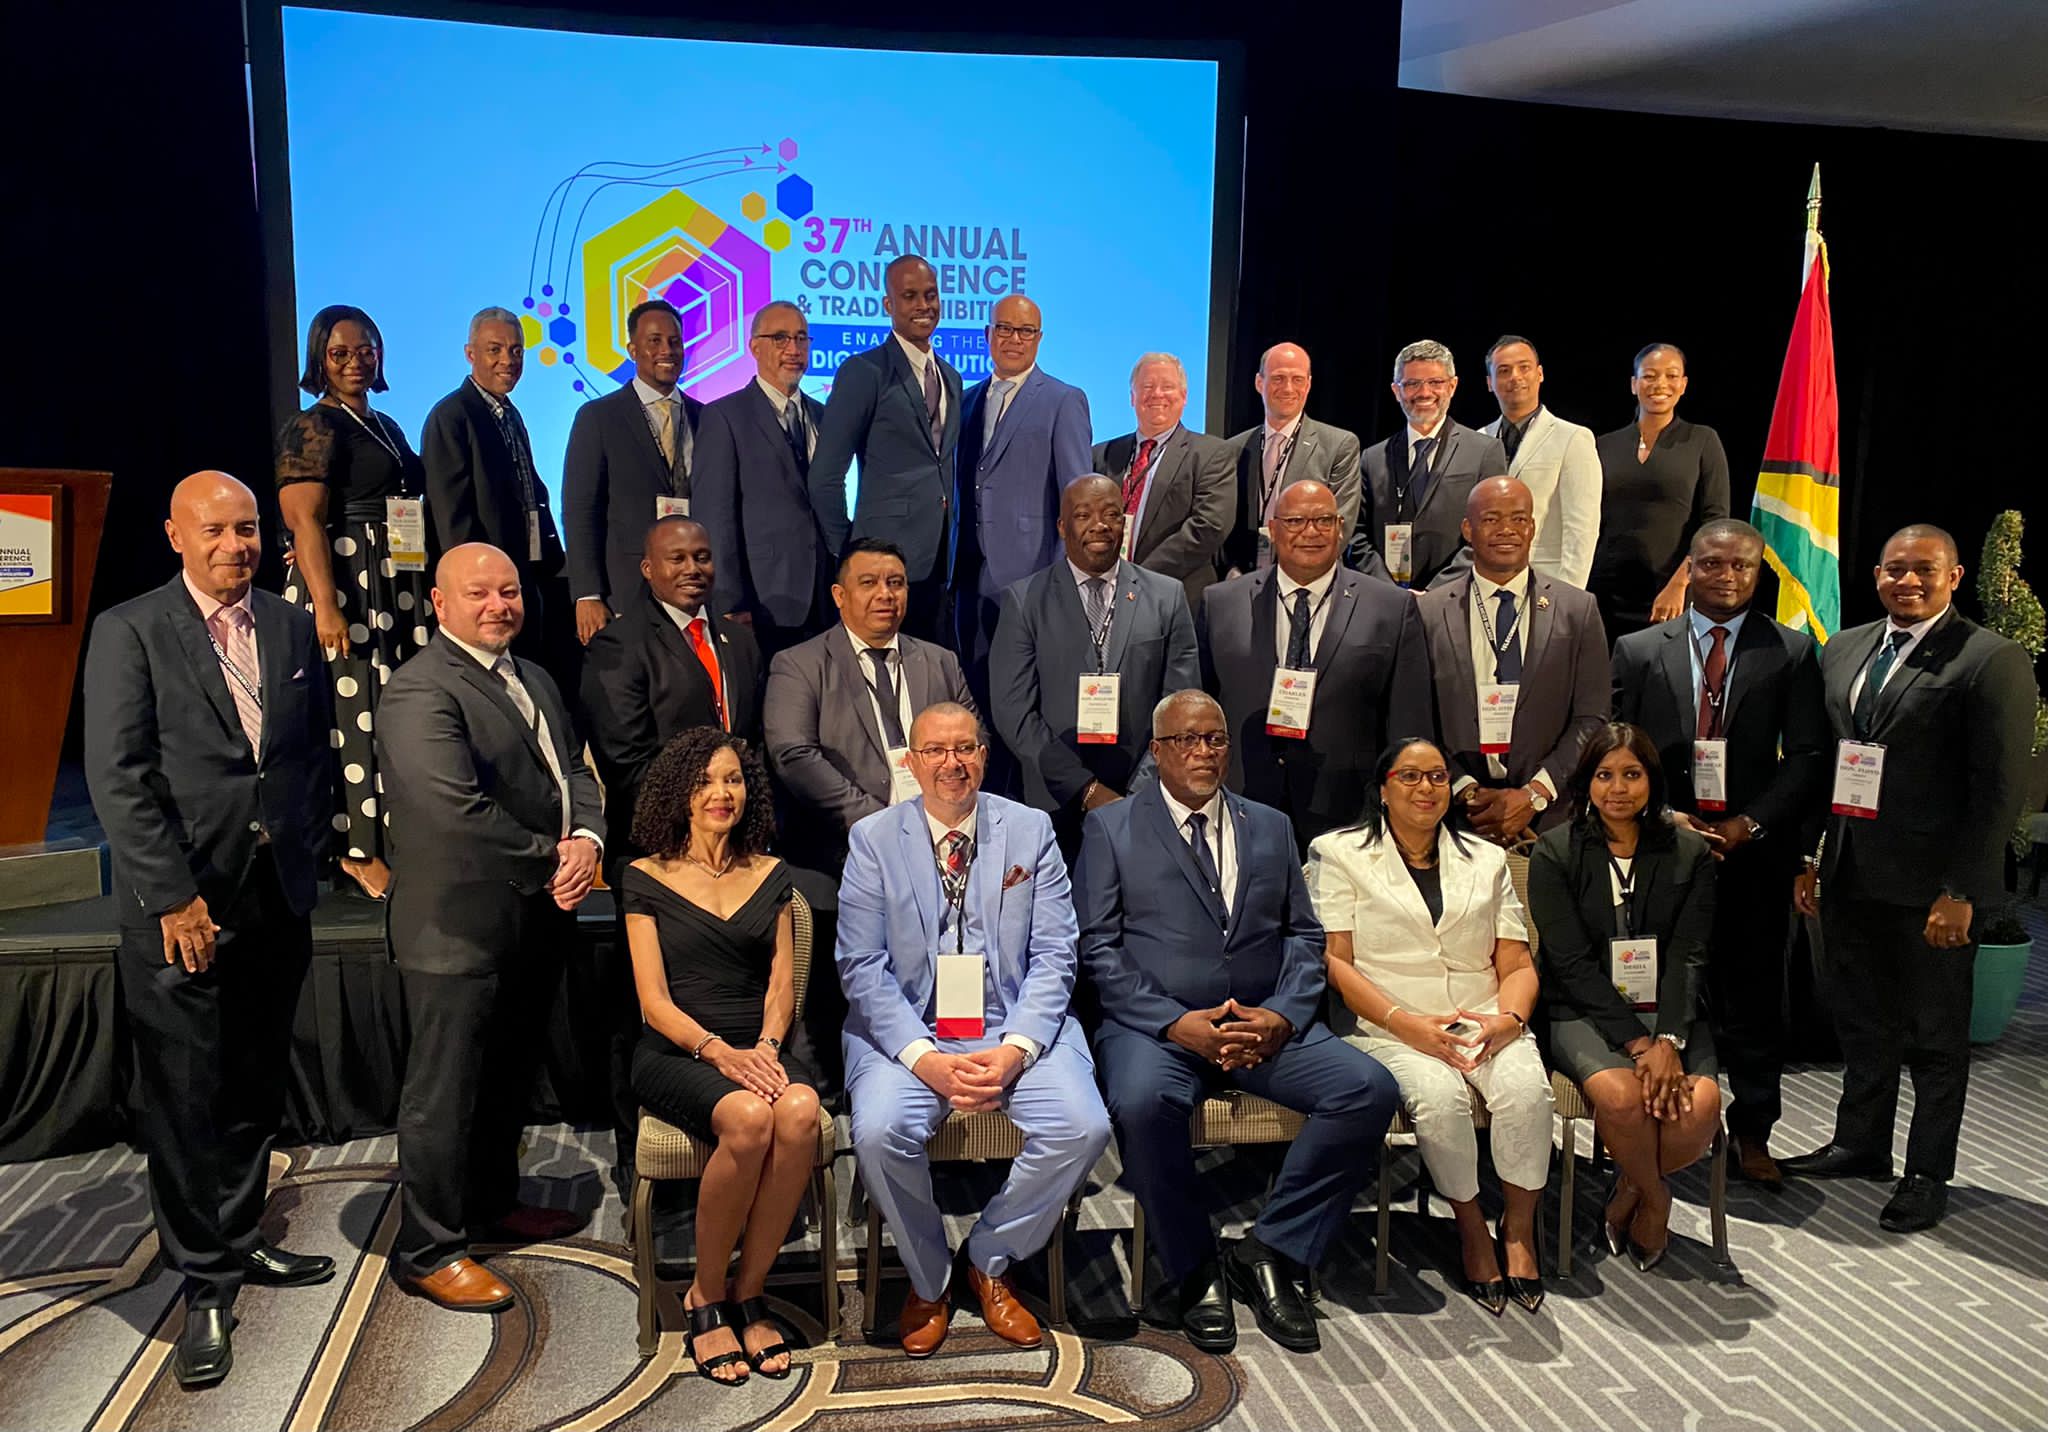 Belize Attends CANTO 37th Annual Conference & Trade Exhibition